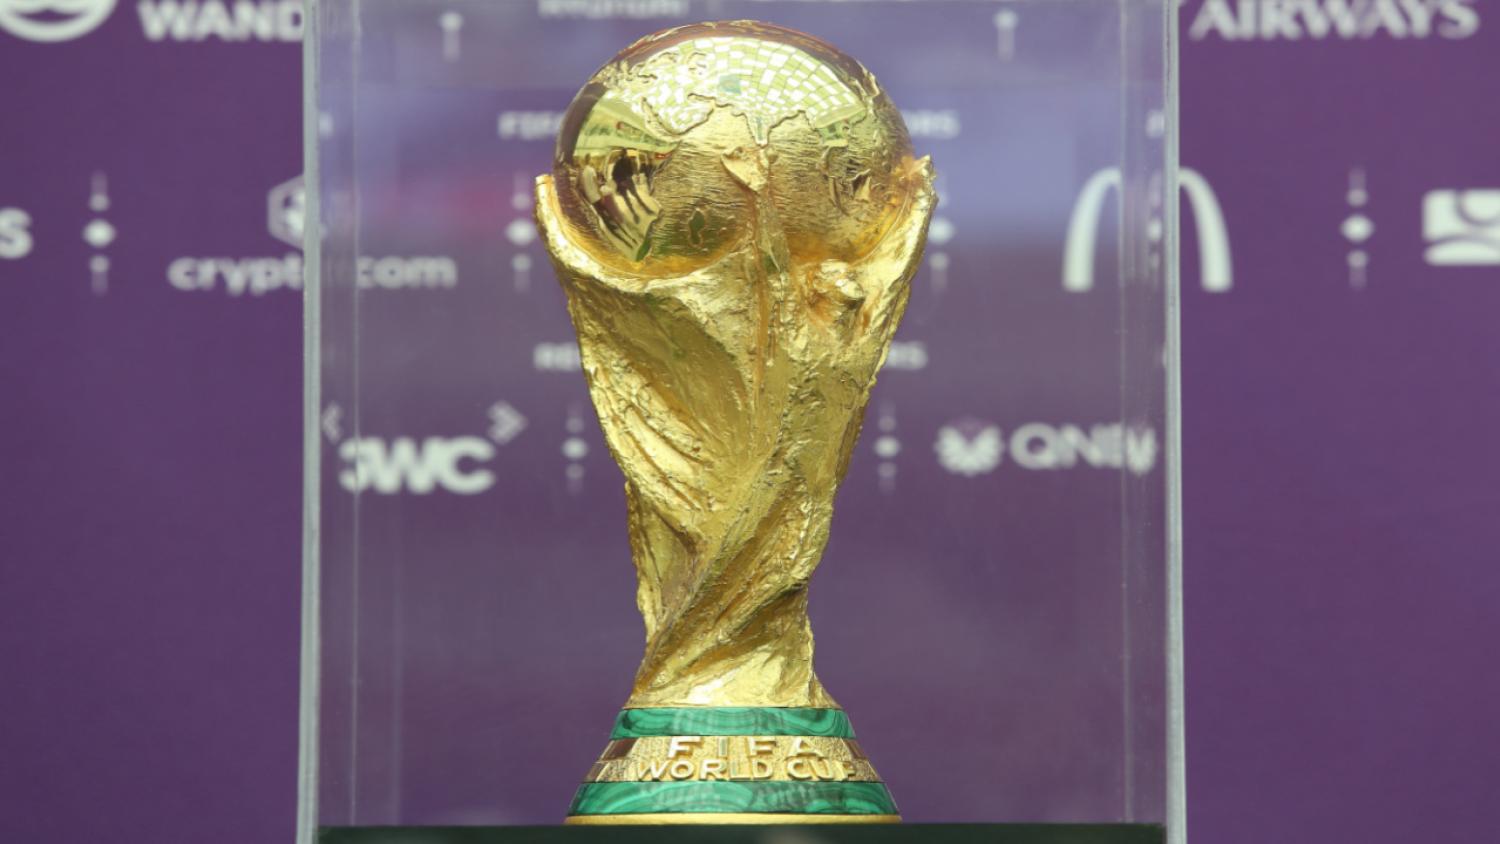 FIFA World Cup Trophy Price Makes It Most Valuable In Sports